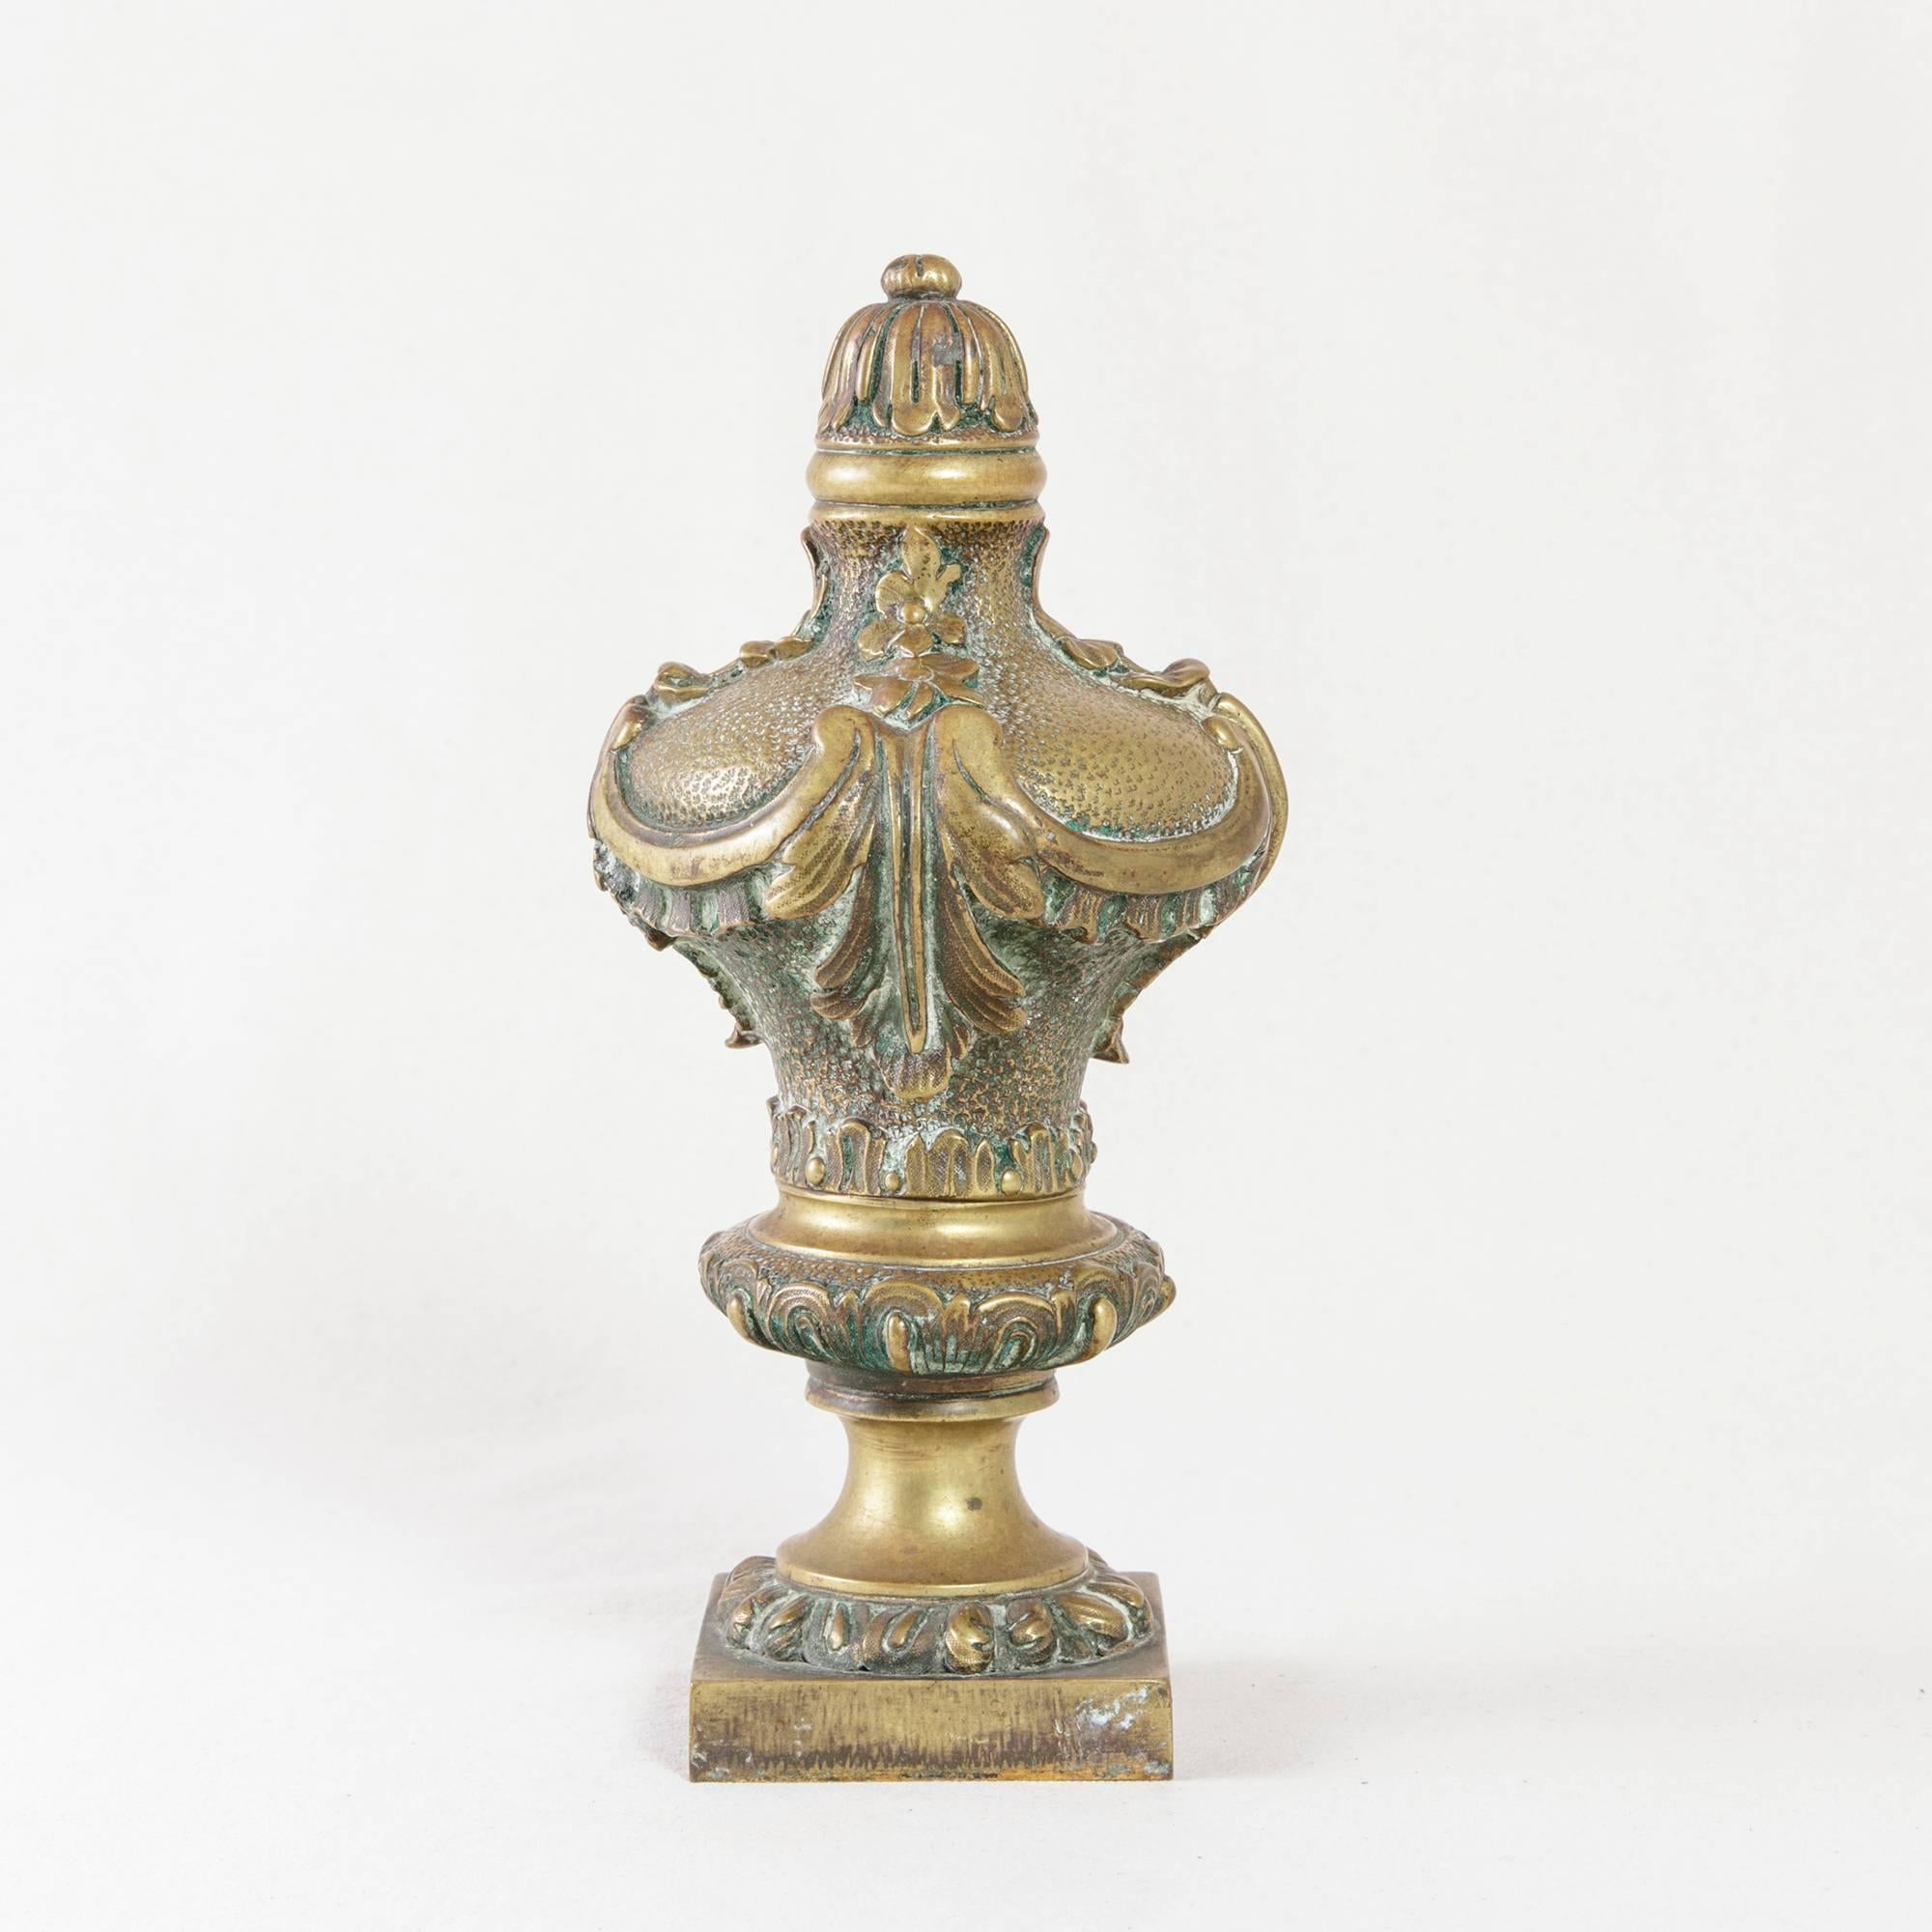 An architectural piece from late 19th century France, this bronze staircase finial will lend its unique form to a bannister or add a decorative element to a bookcase or tablescape. Its elements of French design include florets, trumpet lilies, and